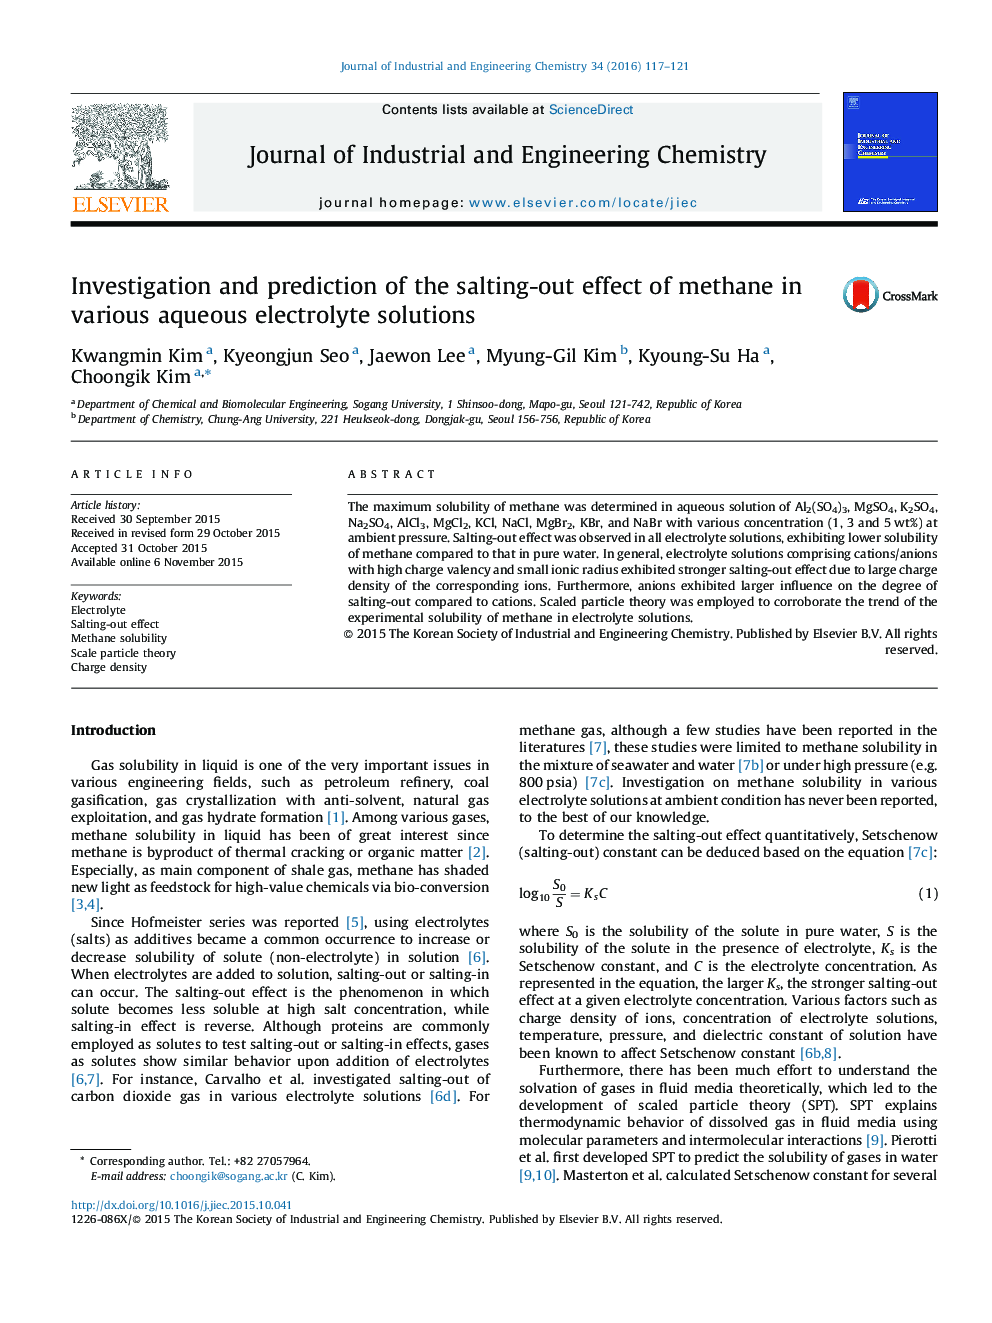 Investigation and prediction of the salting-out effect of methane in various aqueous electrolyte solutions